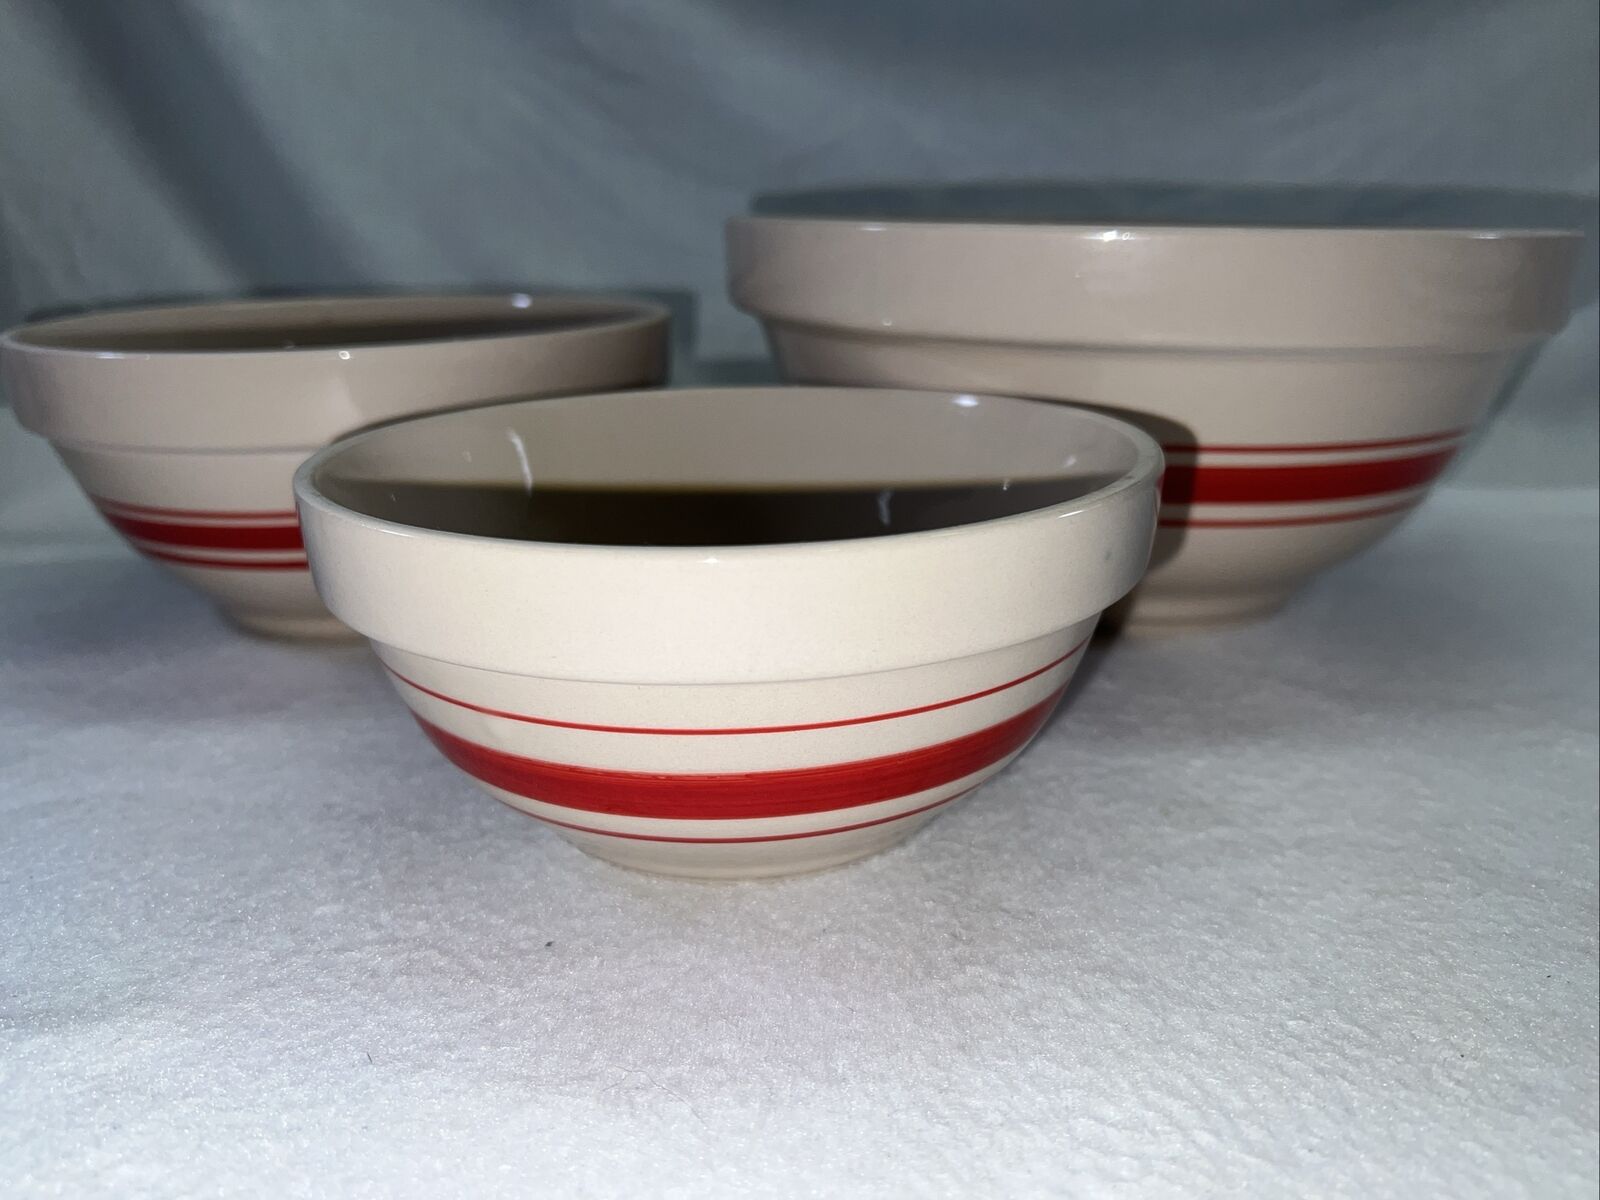 Old Mountain Red Ringed Nesting Mixing Bowl Set Vintage New Old Stock Kitchen